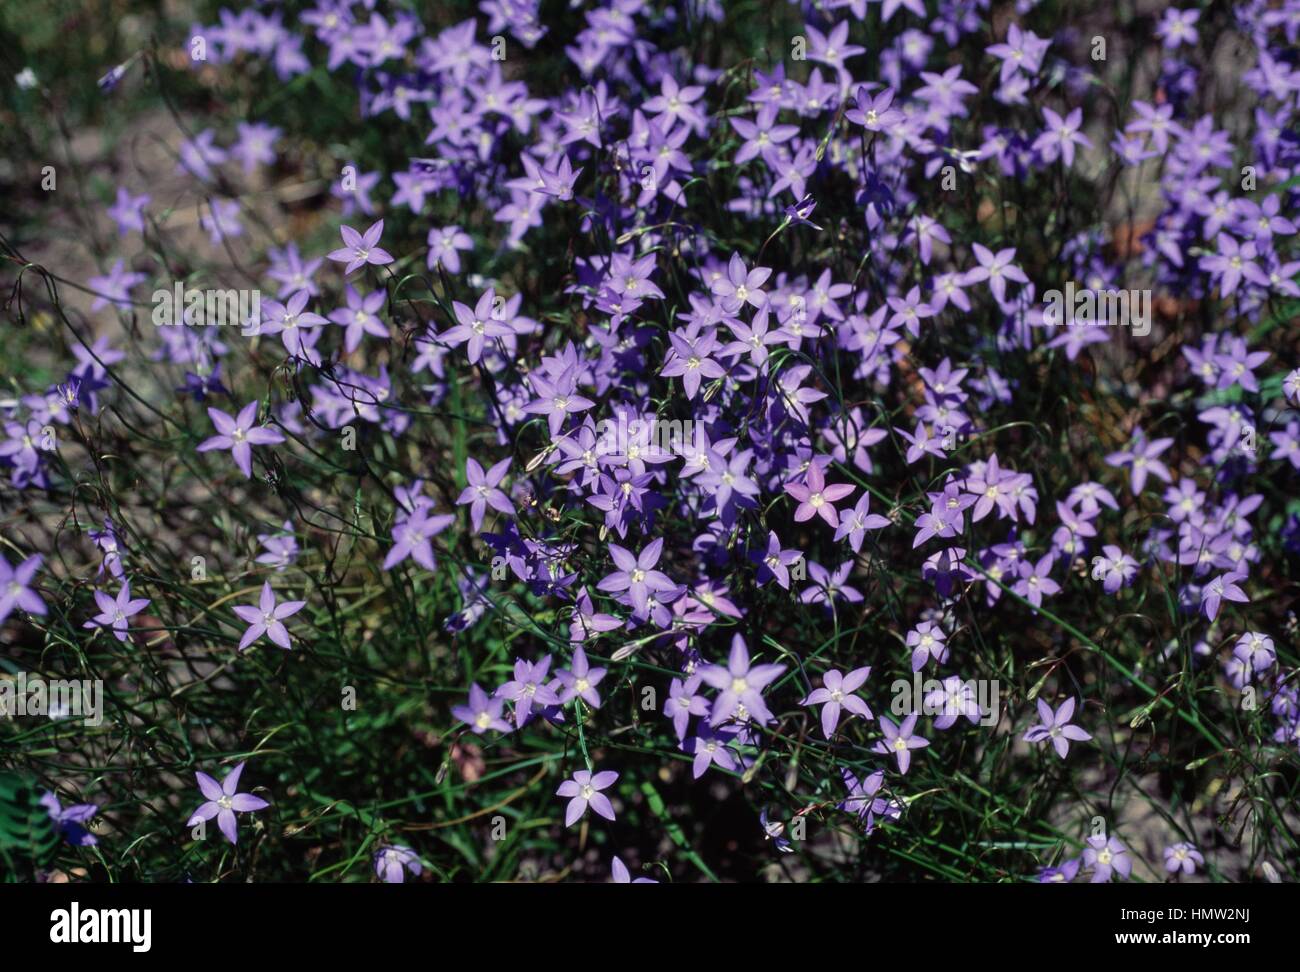 Tufted Bluebell (Wahlenbergia communis or Wahlenbergia capillaris), Campanulaceae. Stock Photo